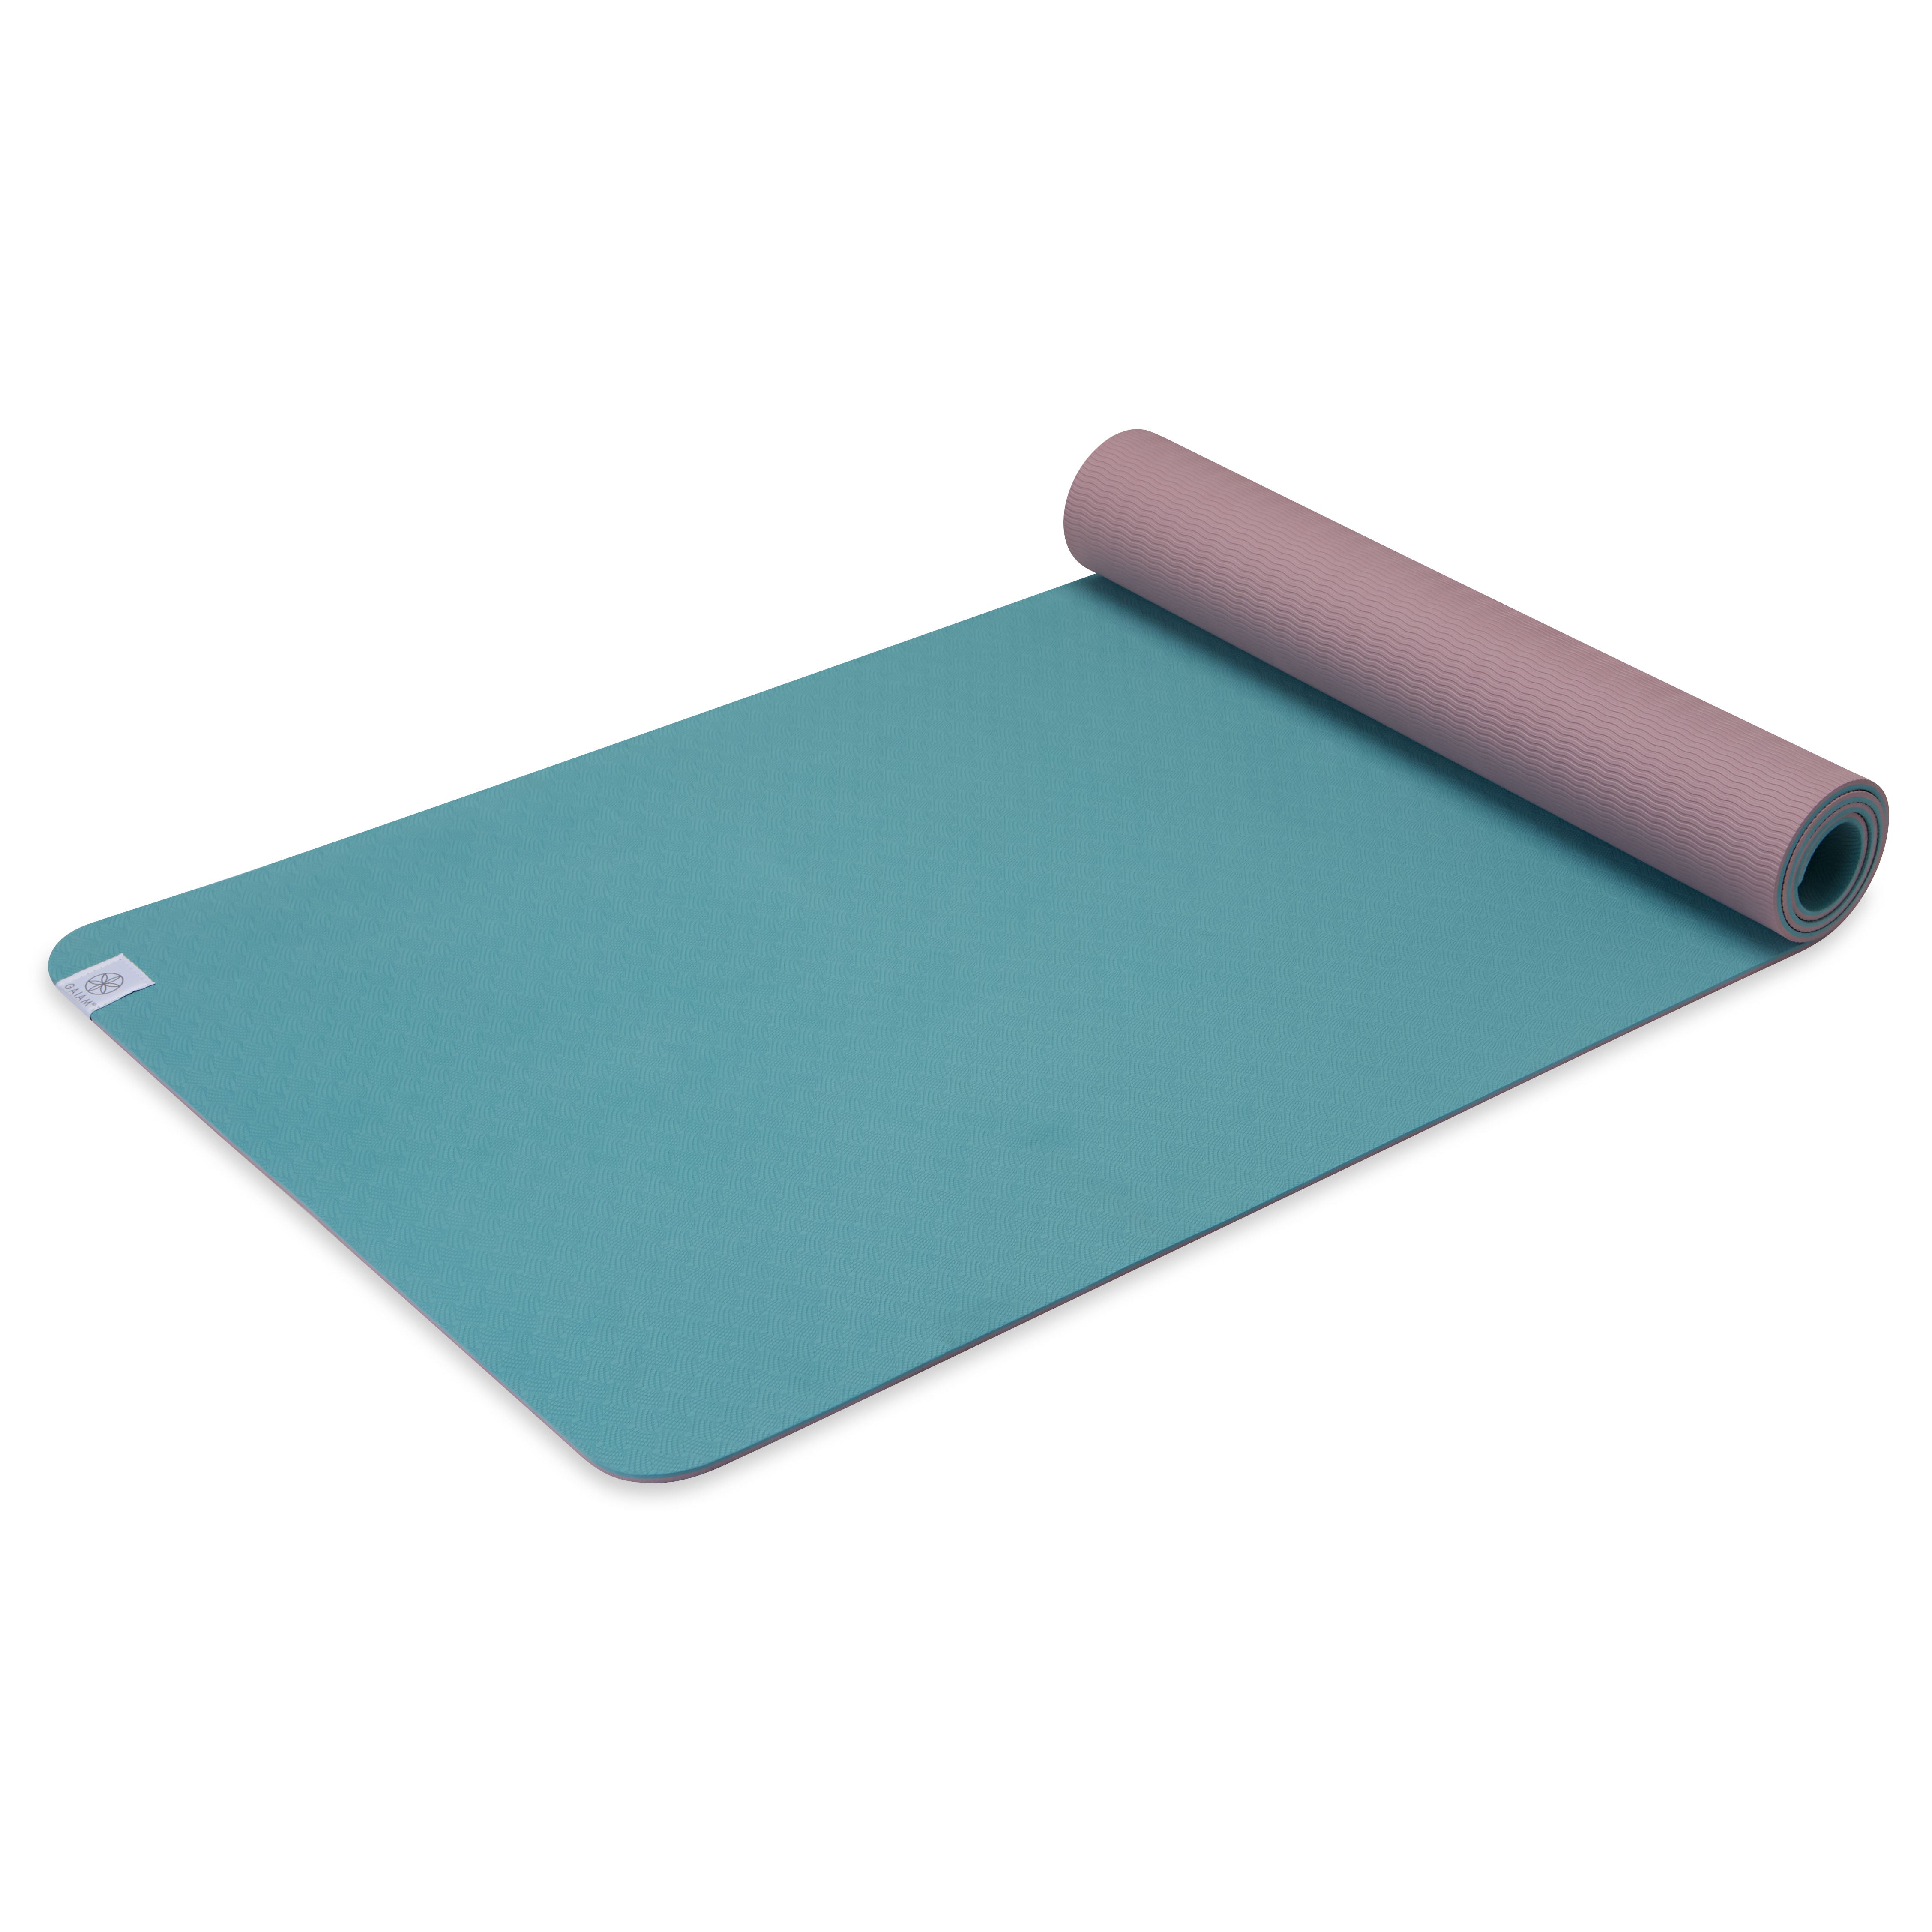 Gaiam Performance Yoga Mat (6mm) Seafoam/Dusty Pink top rolled angle